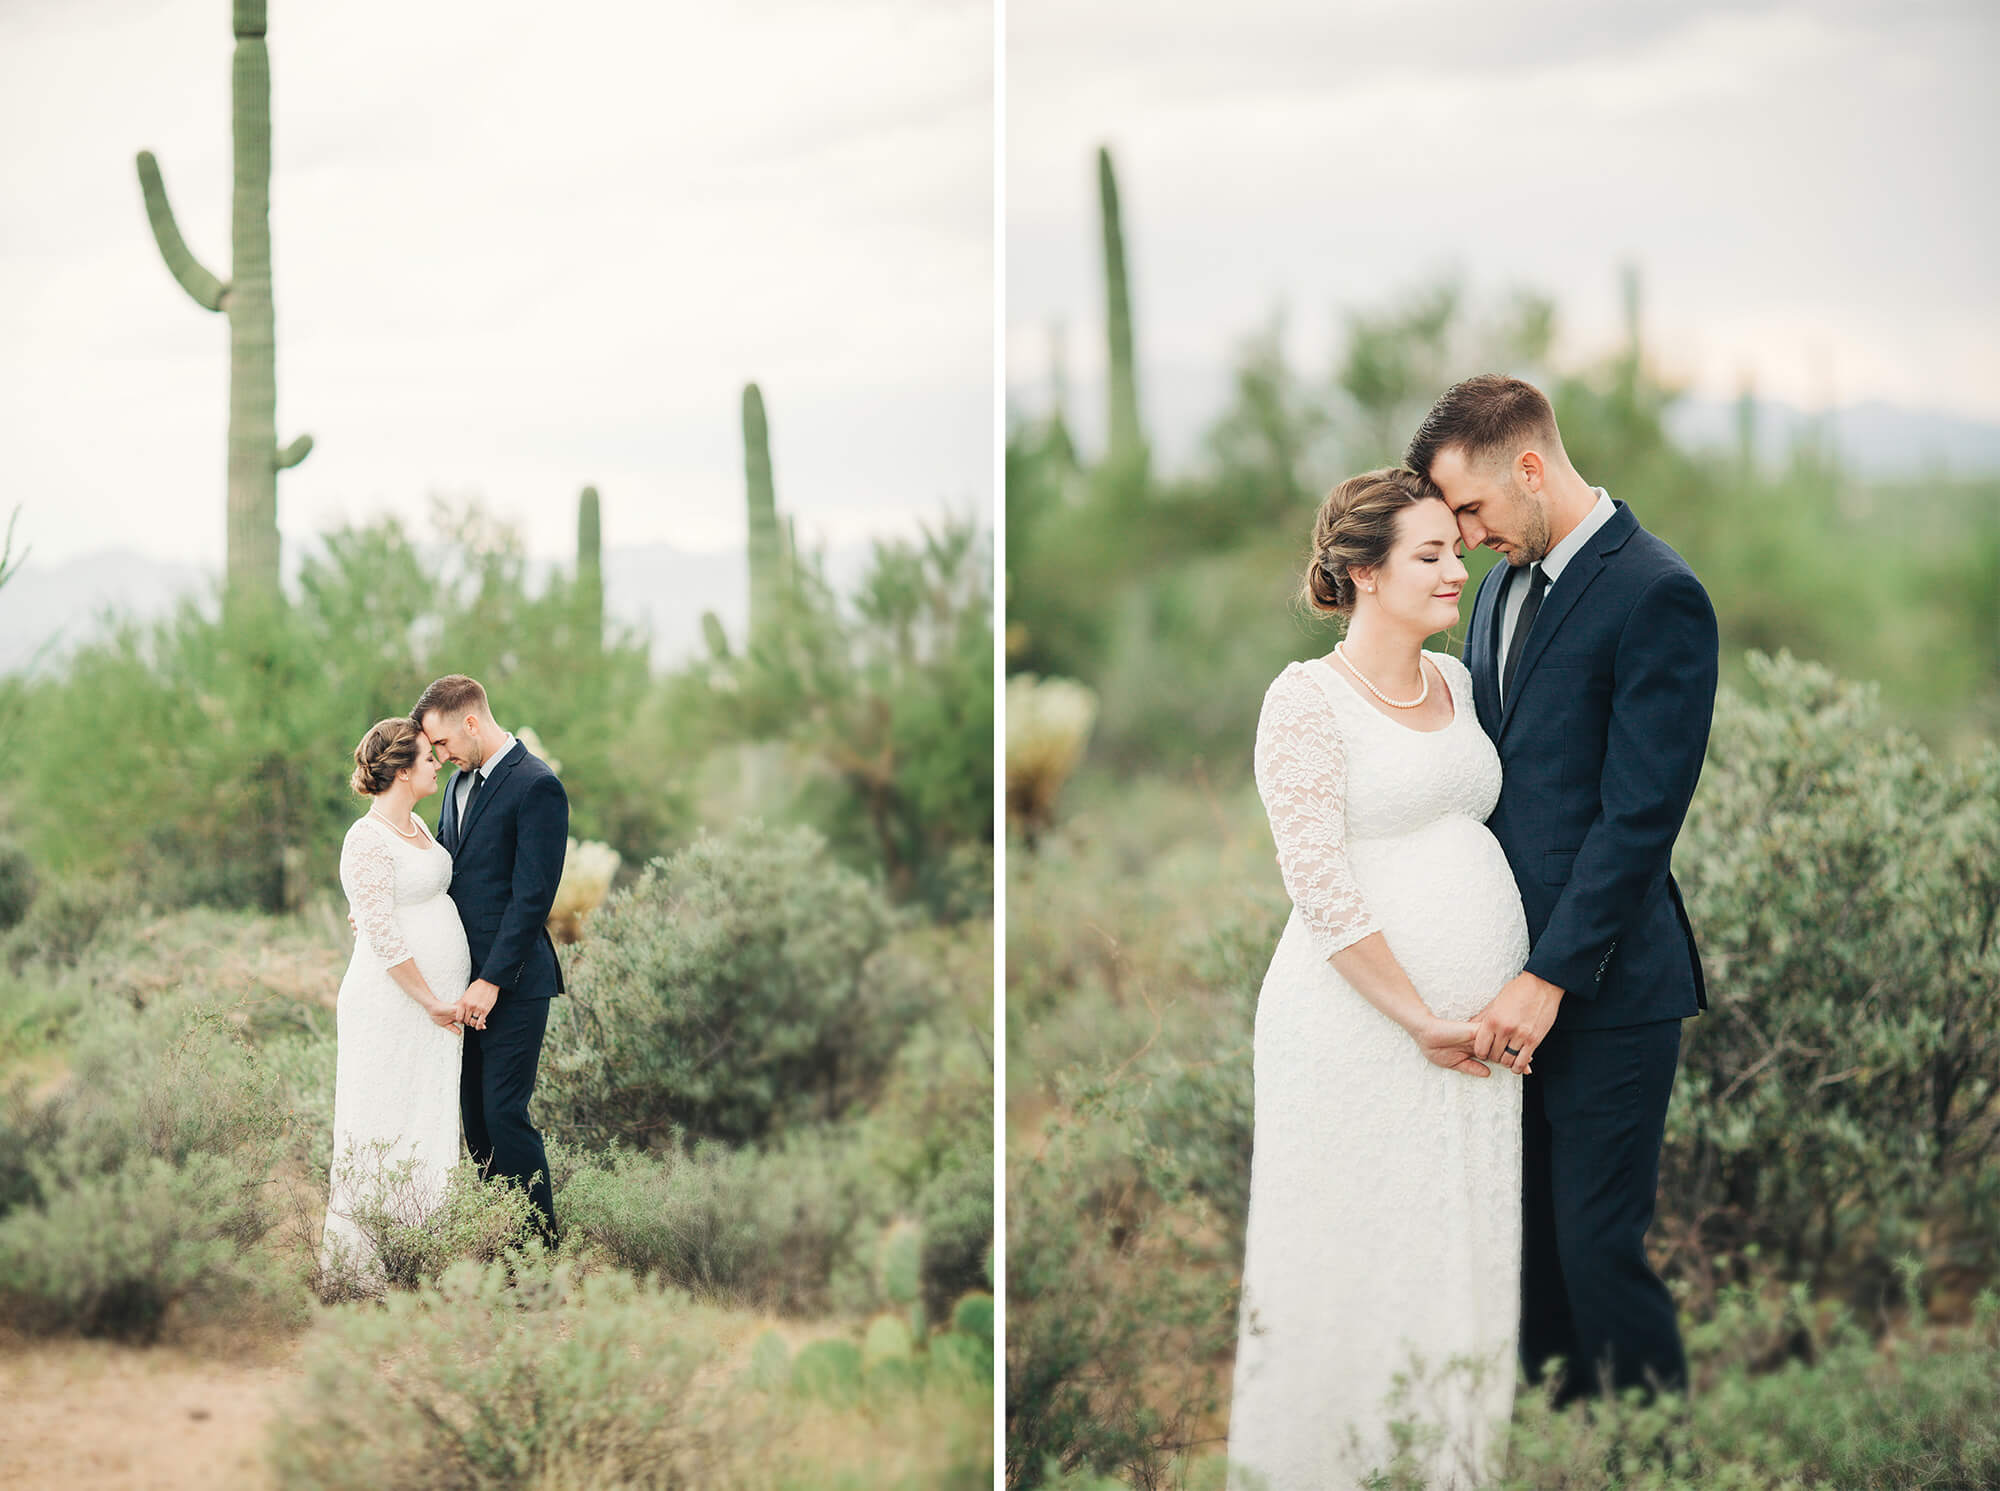 An intimate moment between newly married man and wife in the desert just outside of Tucson.